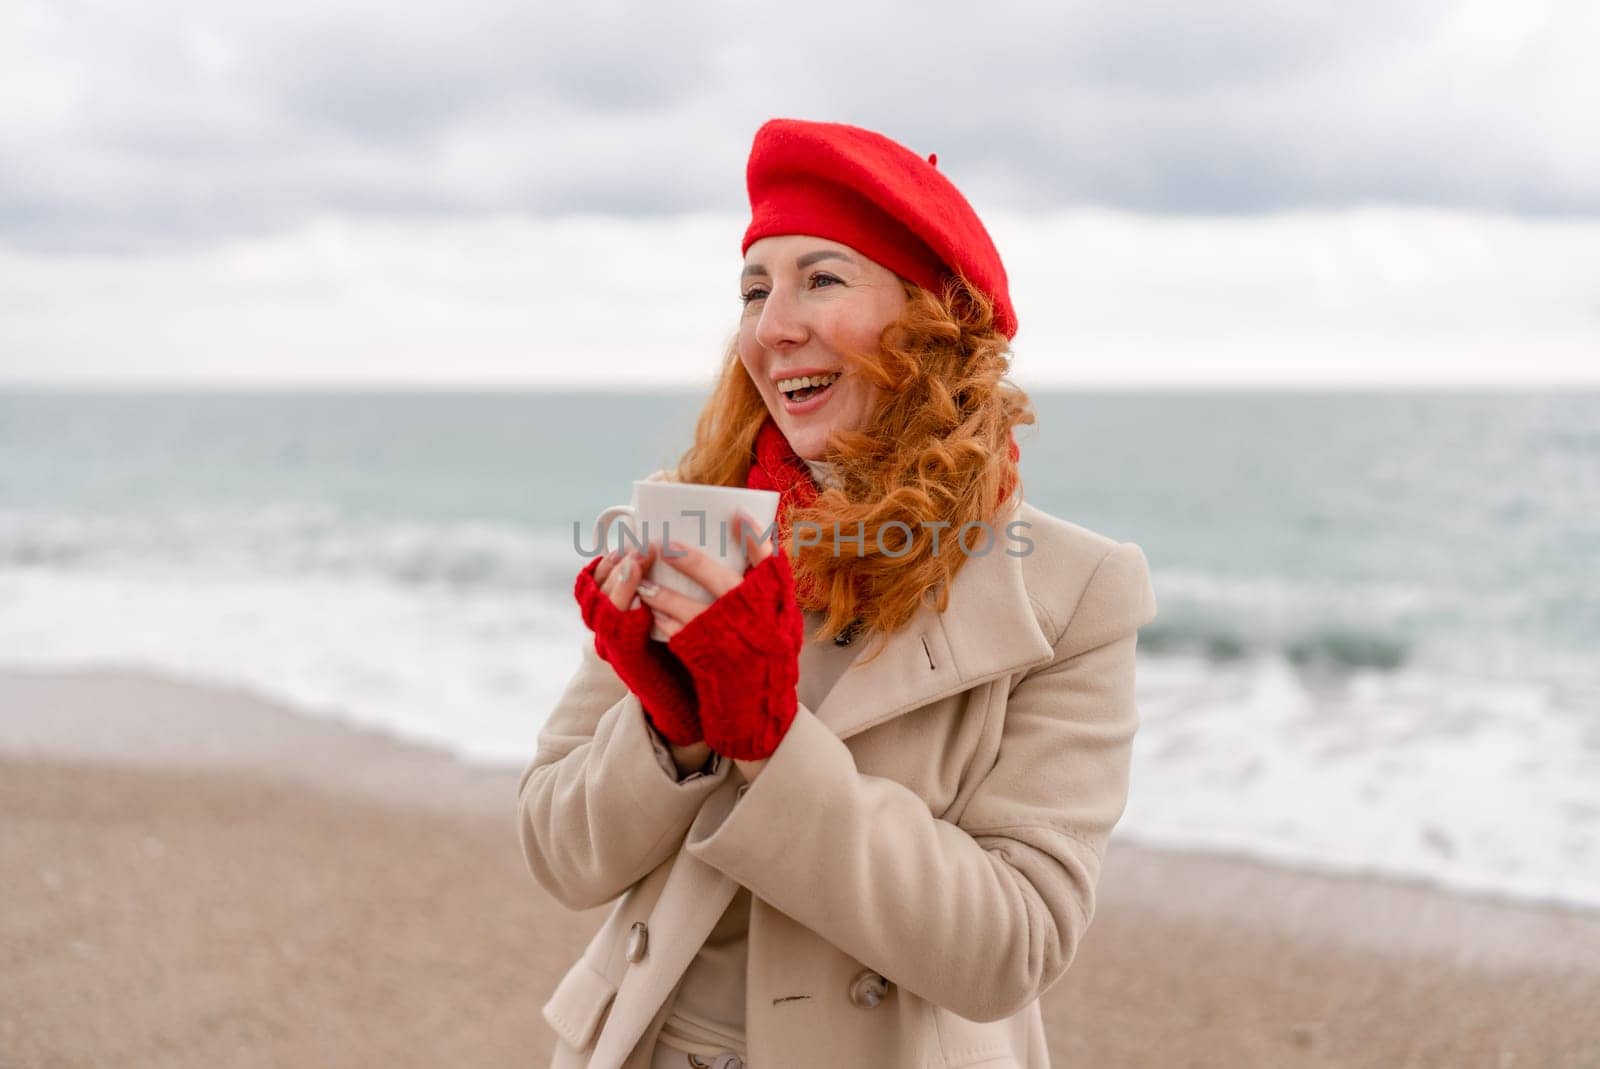 Woman beach in red beret scarf and mitts holding a cup of tea in his hands. Depicting beach relaxation and cozy attire. Walks by the sea.